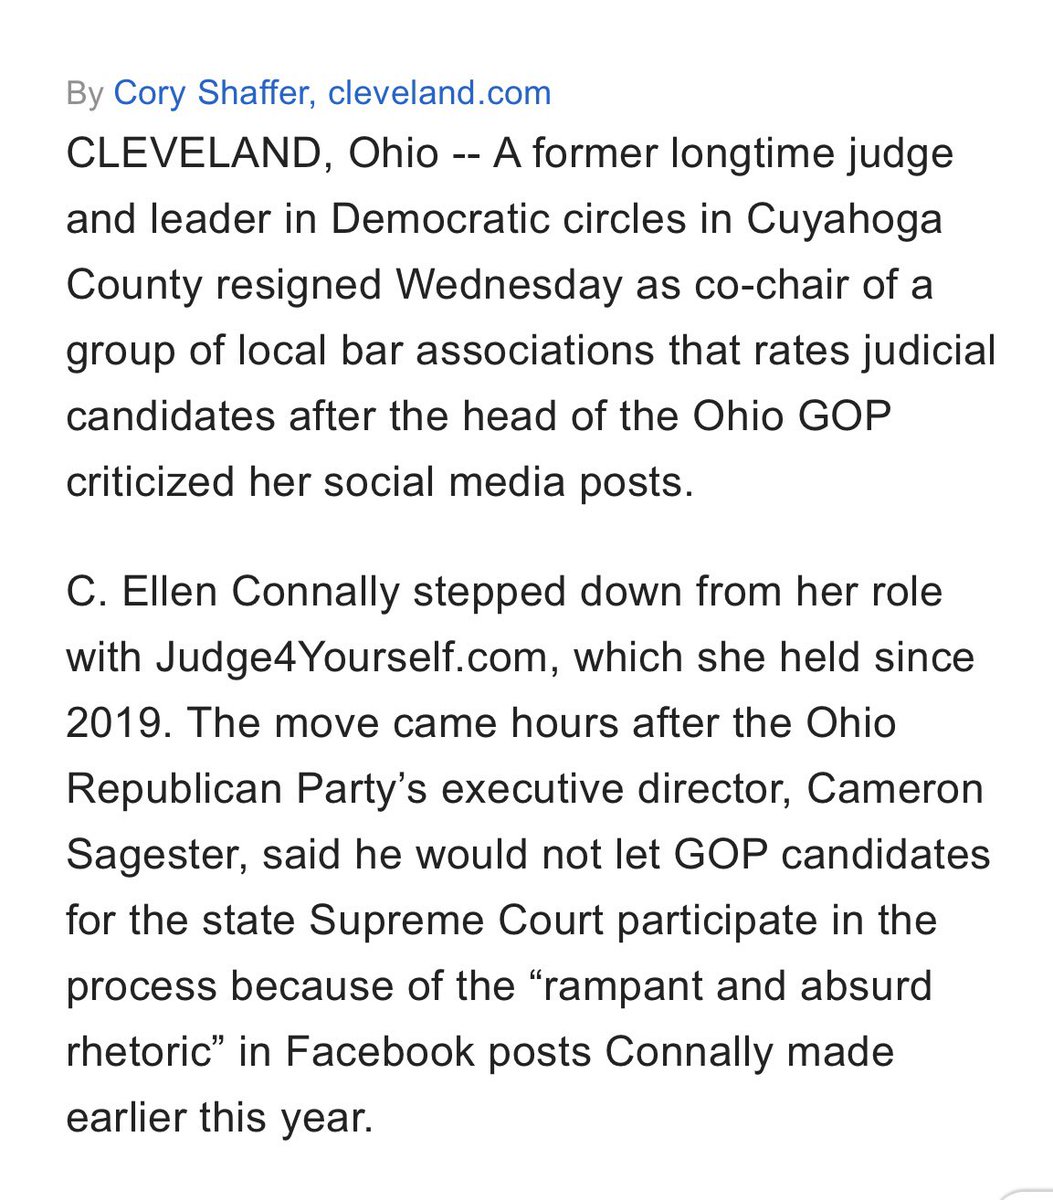 Old enough to remember when Ellen Connally was the Ohio GOP’s favorite Democrat because she occasionally sad bad things about Ed FitzGerald, Kasich’s re-election challenger in 2014. cleveland.com/open/2013/10/g… What a decade it’s been.